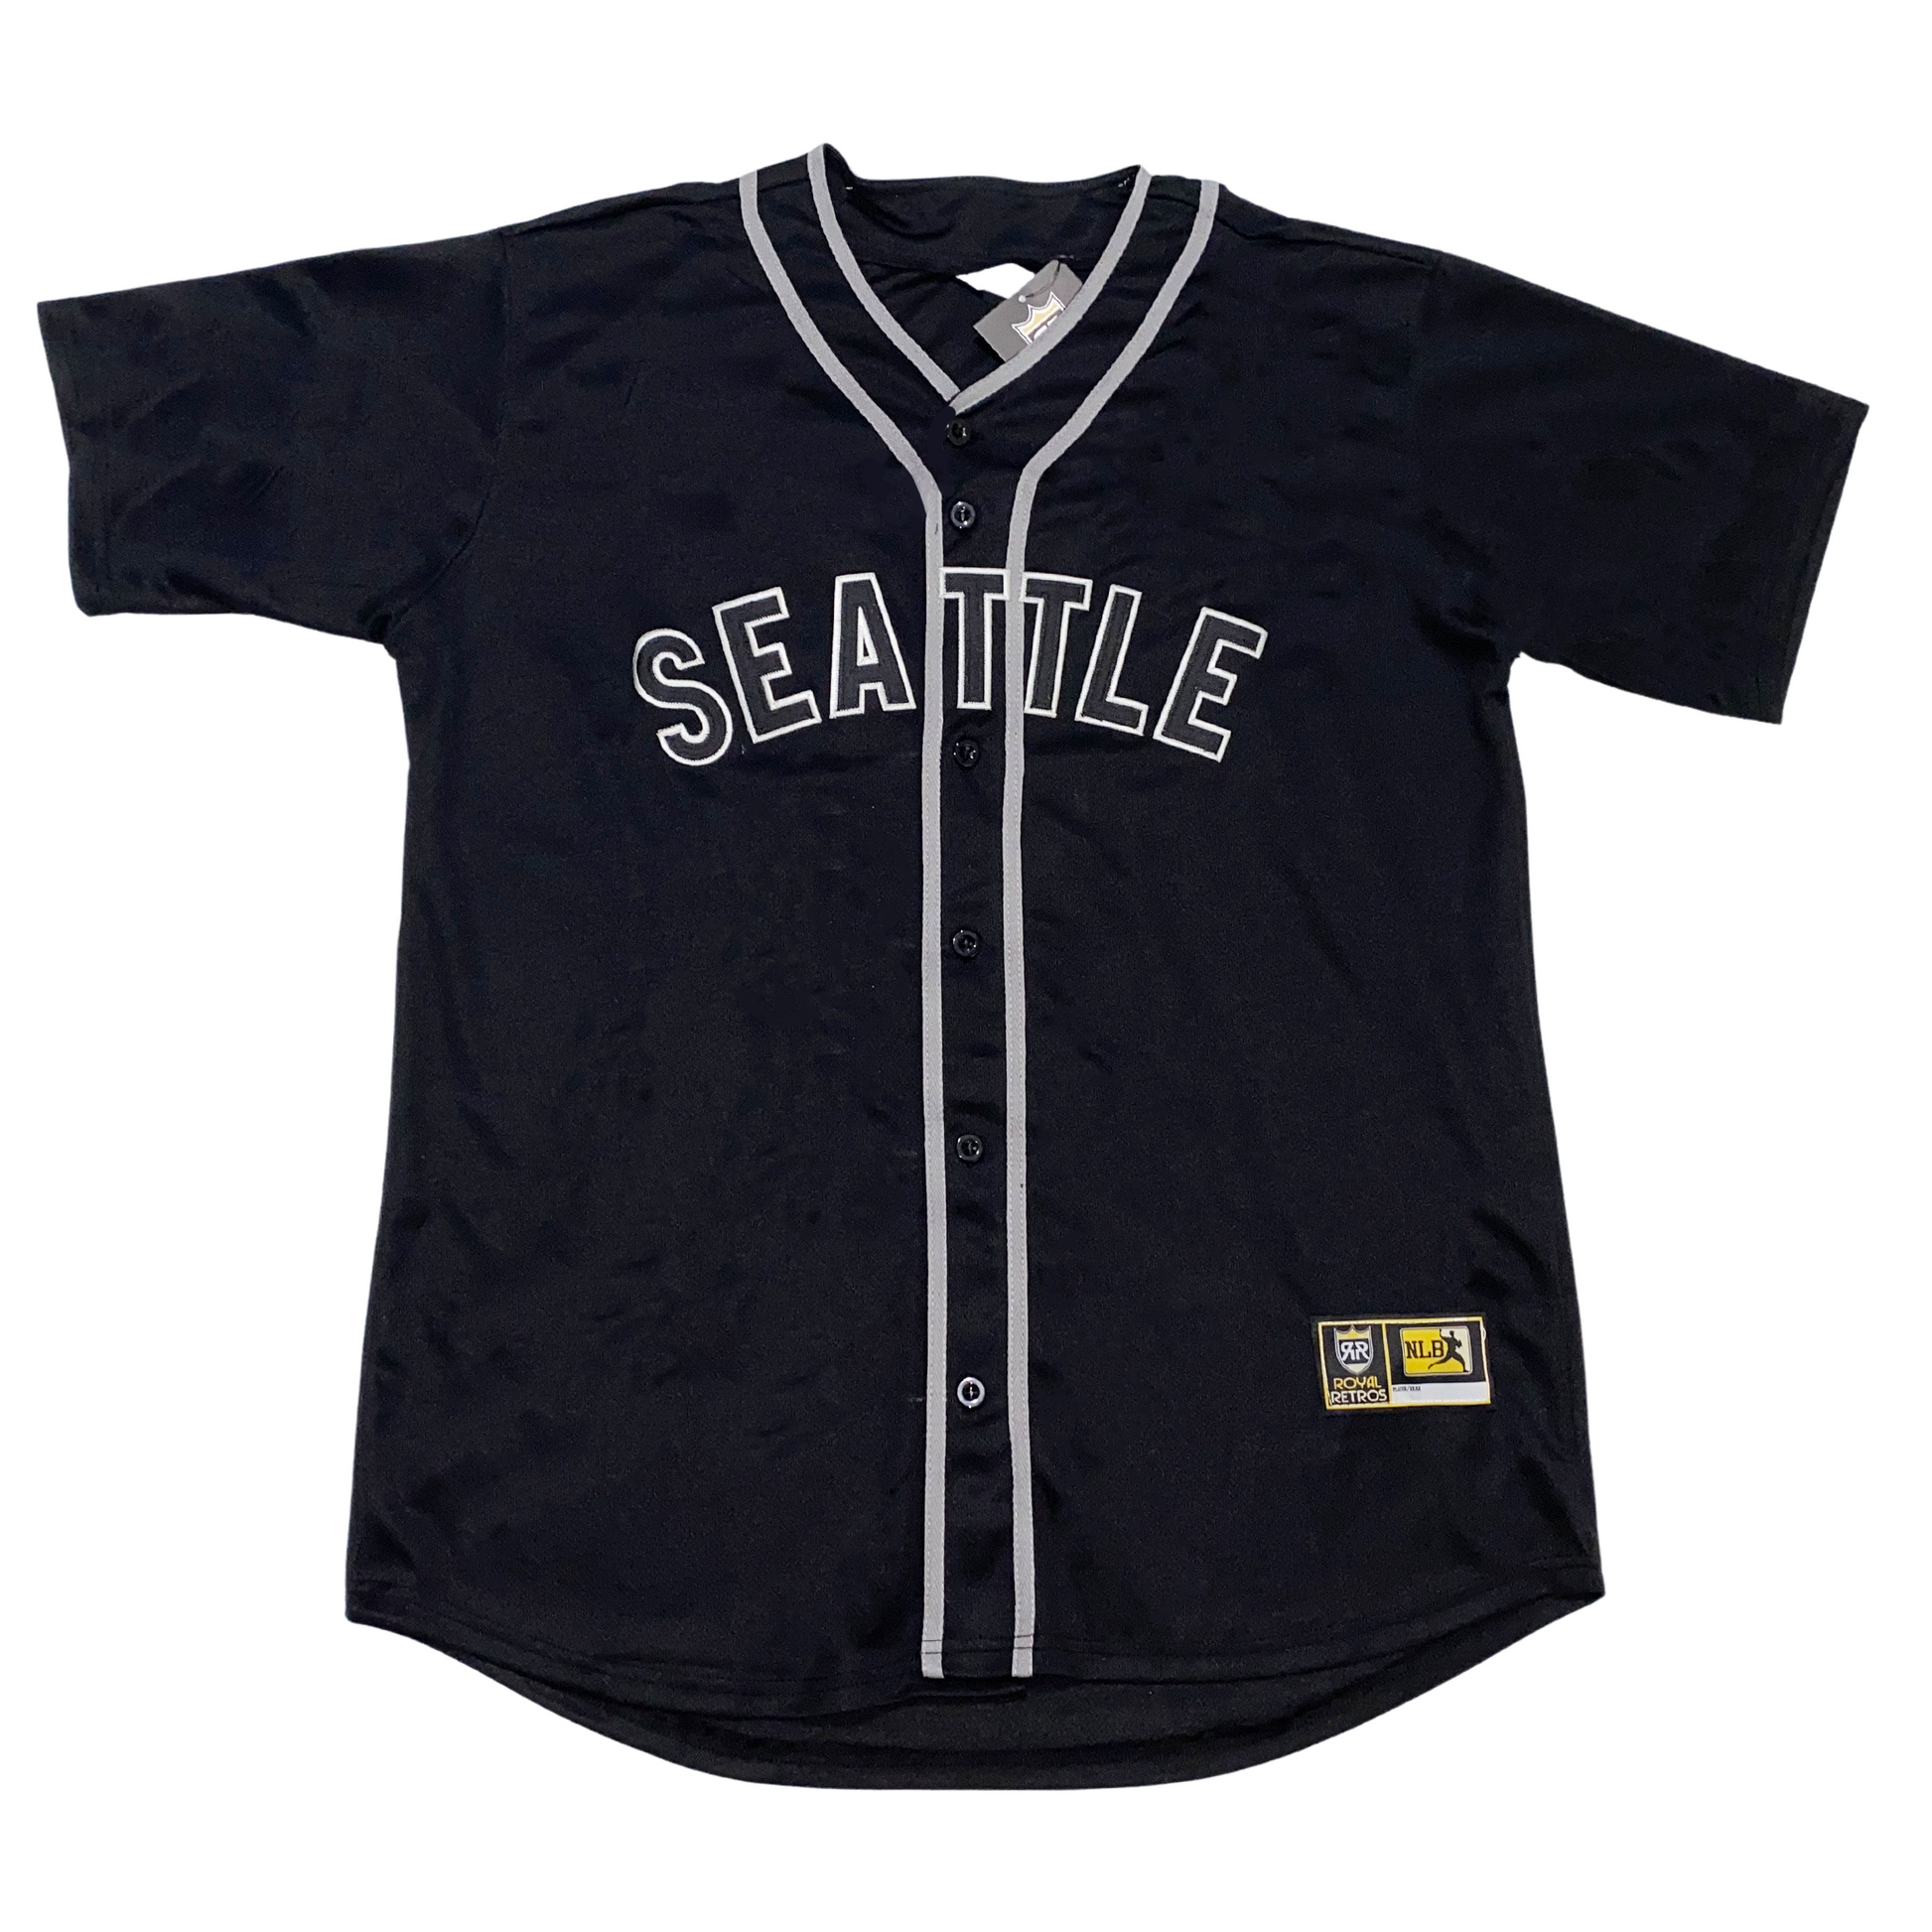 Mariners Team Store on X: Steelheads merchandise is available NOW